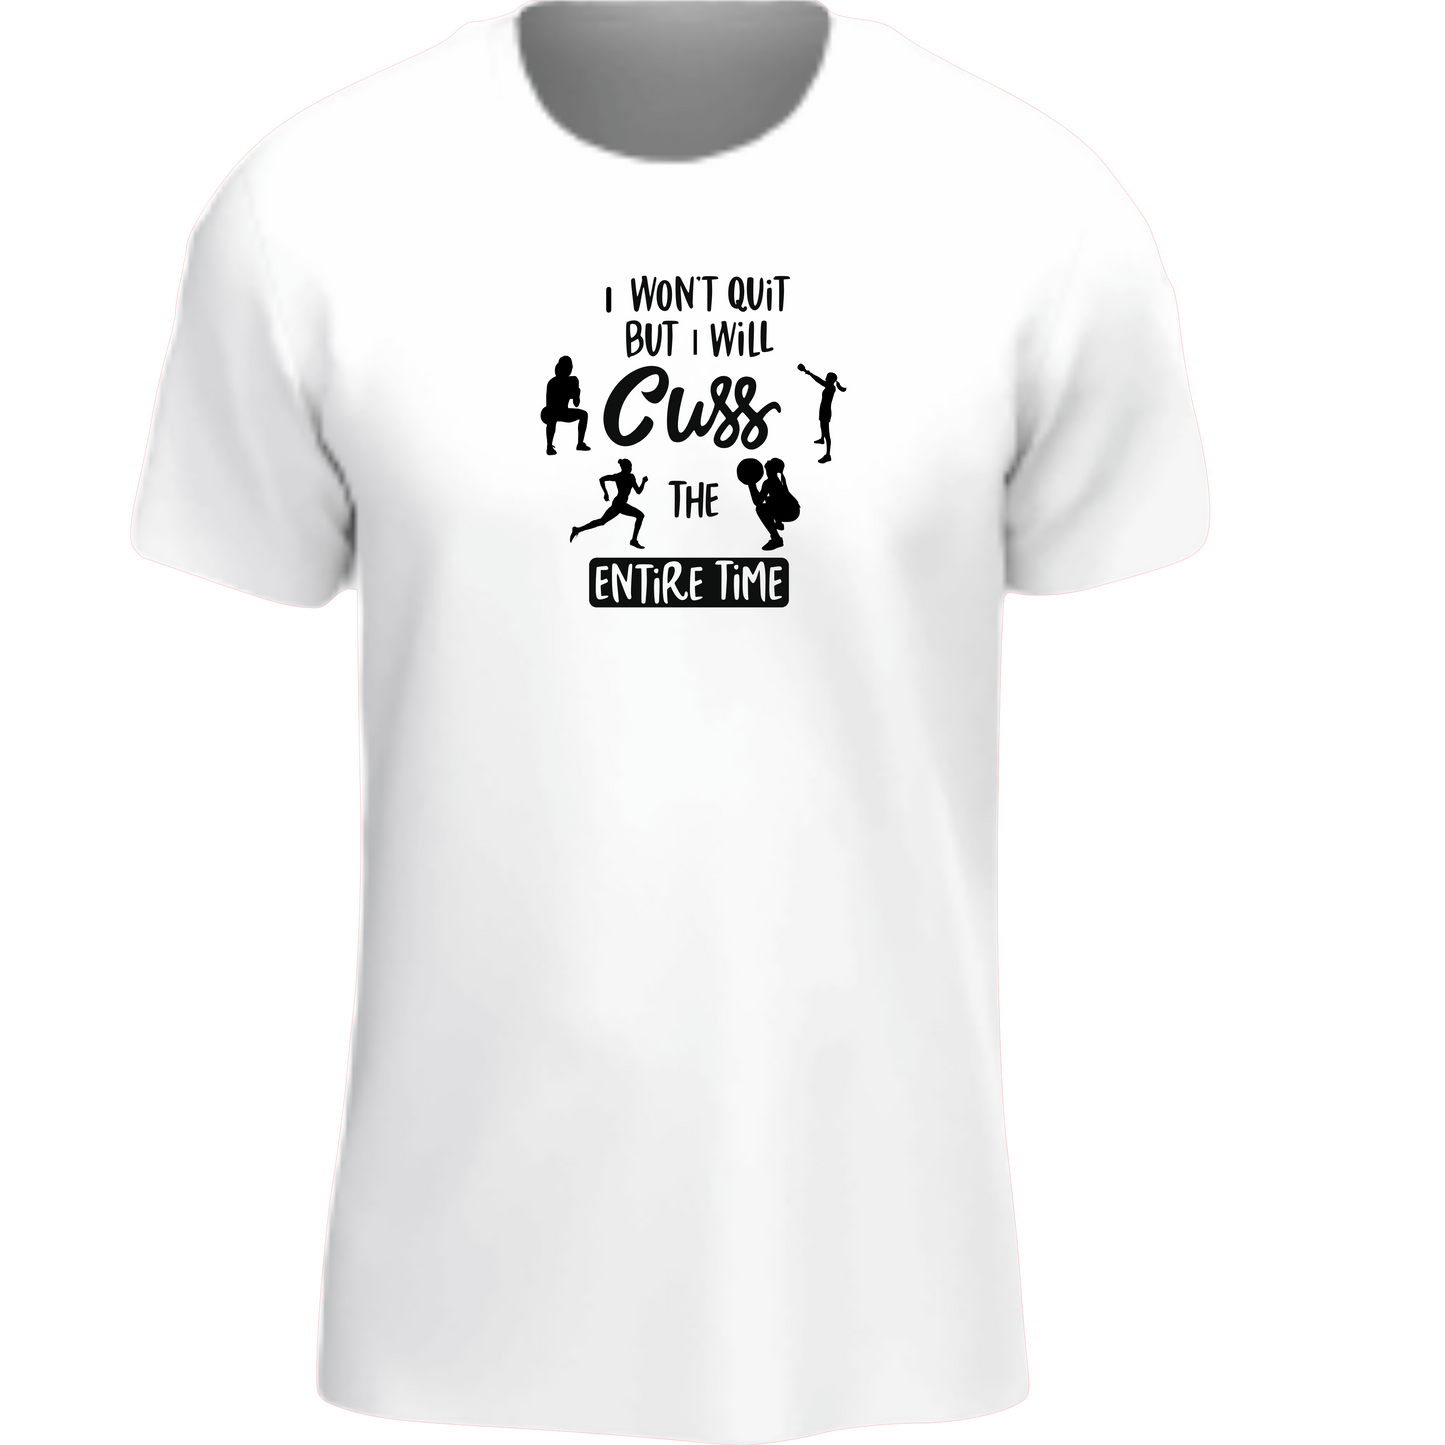 ' I Won't Quit But I Will Cuss the Entire Time' Adult  T-Shirt